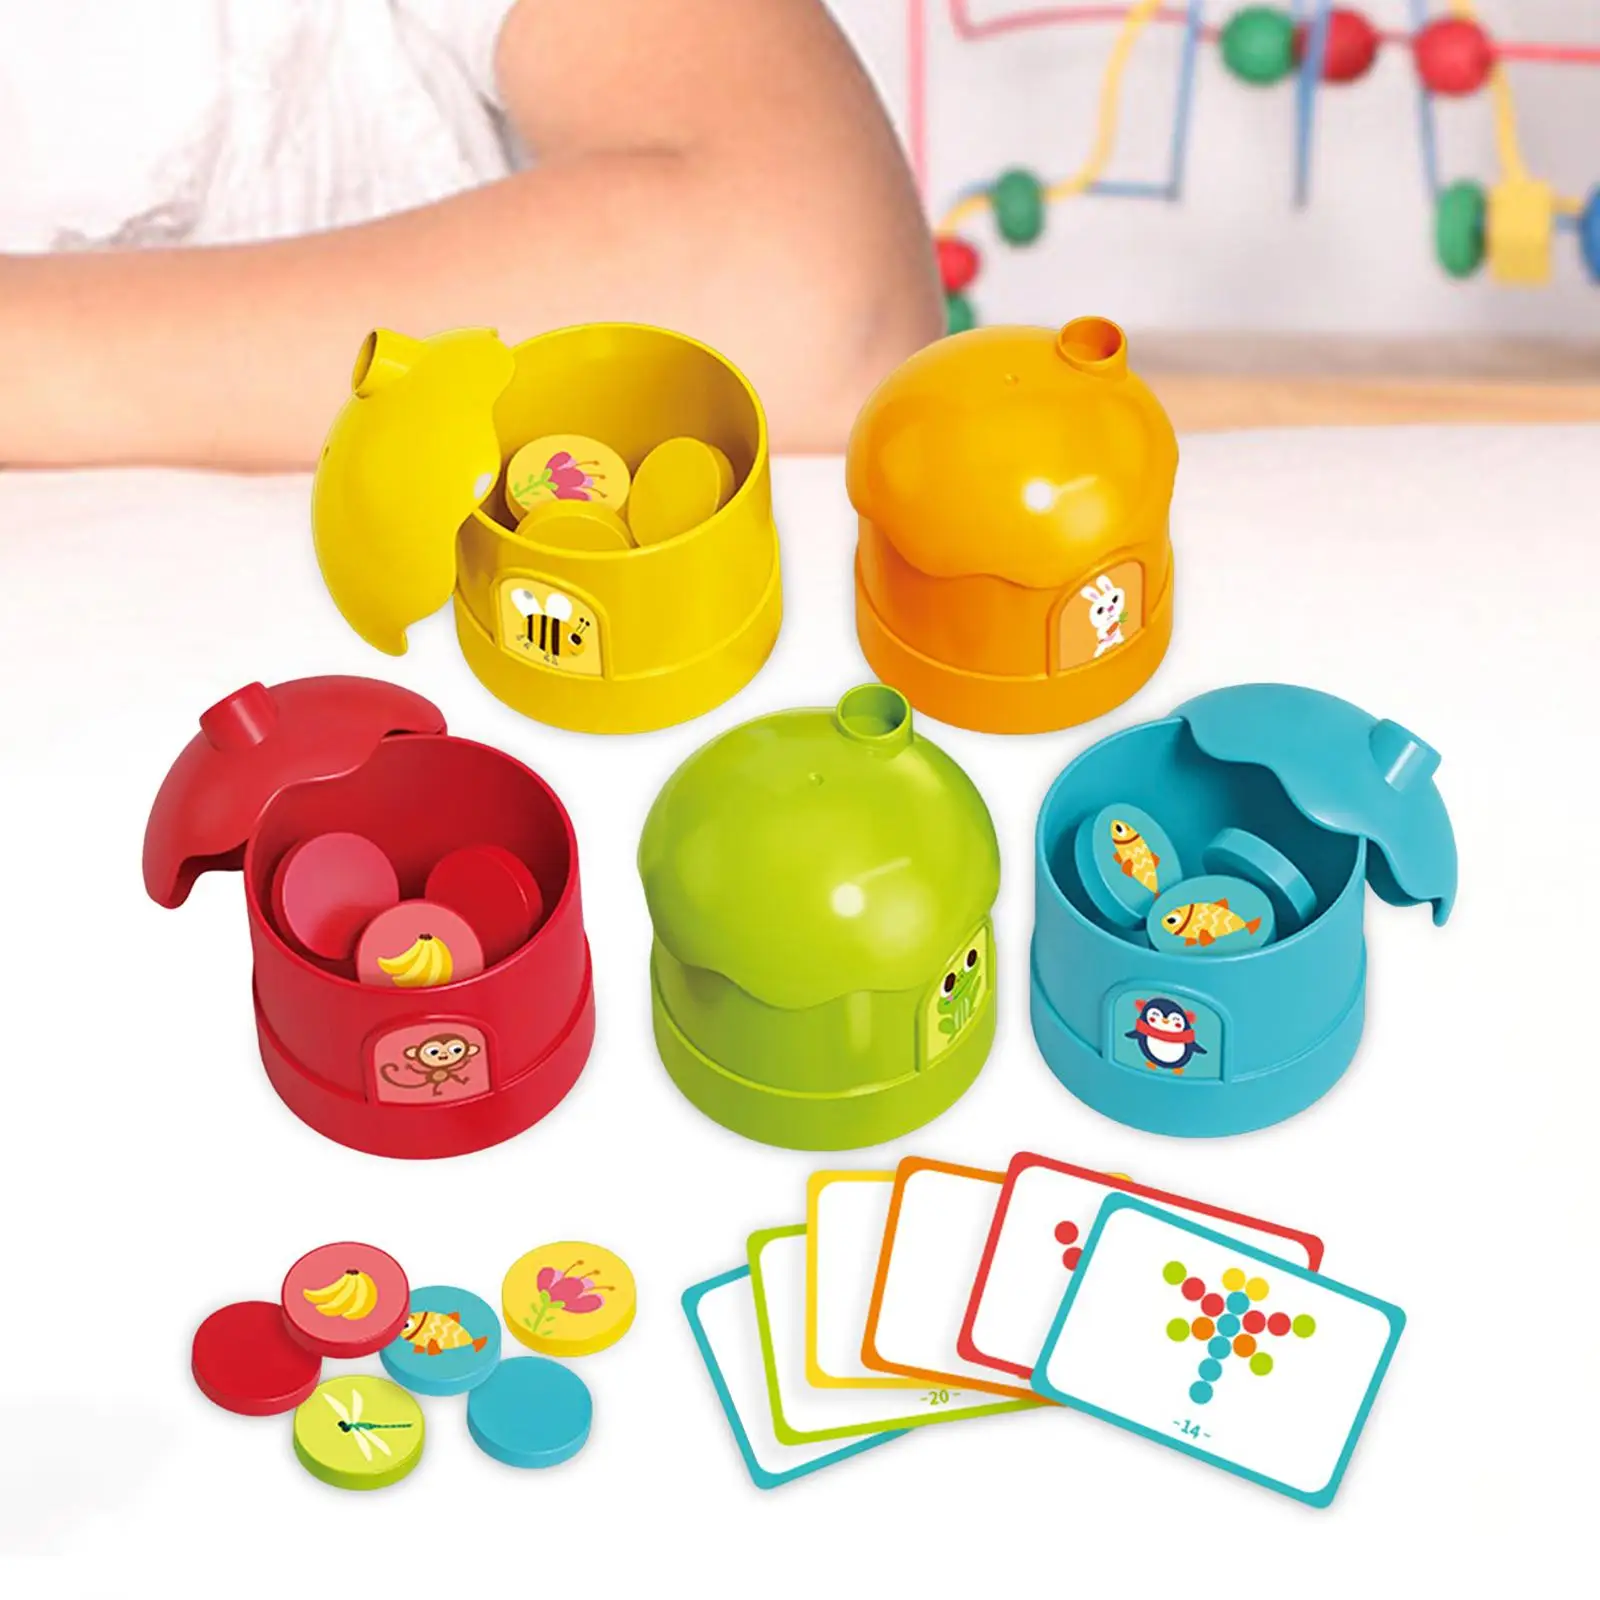 Educational Color Sorting Cup Gift Cognition Practical for Family Party